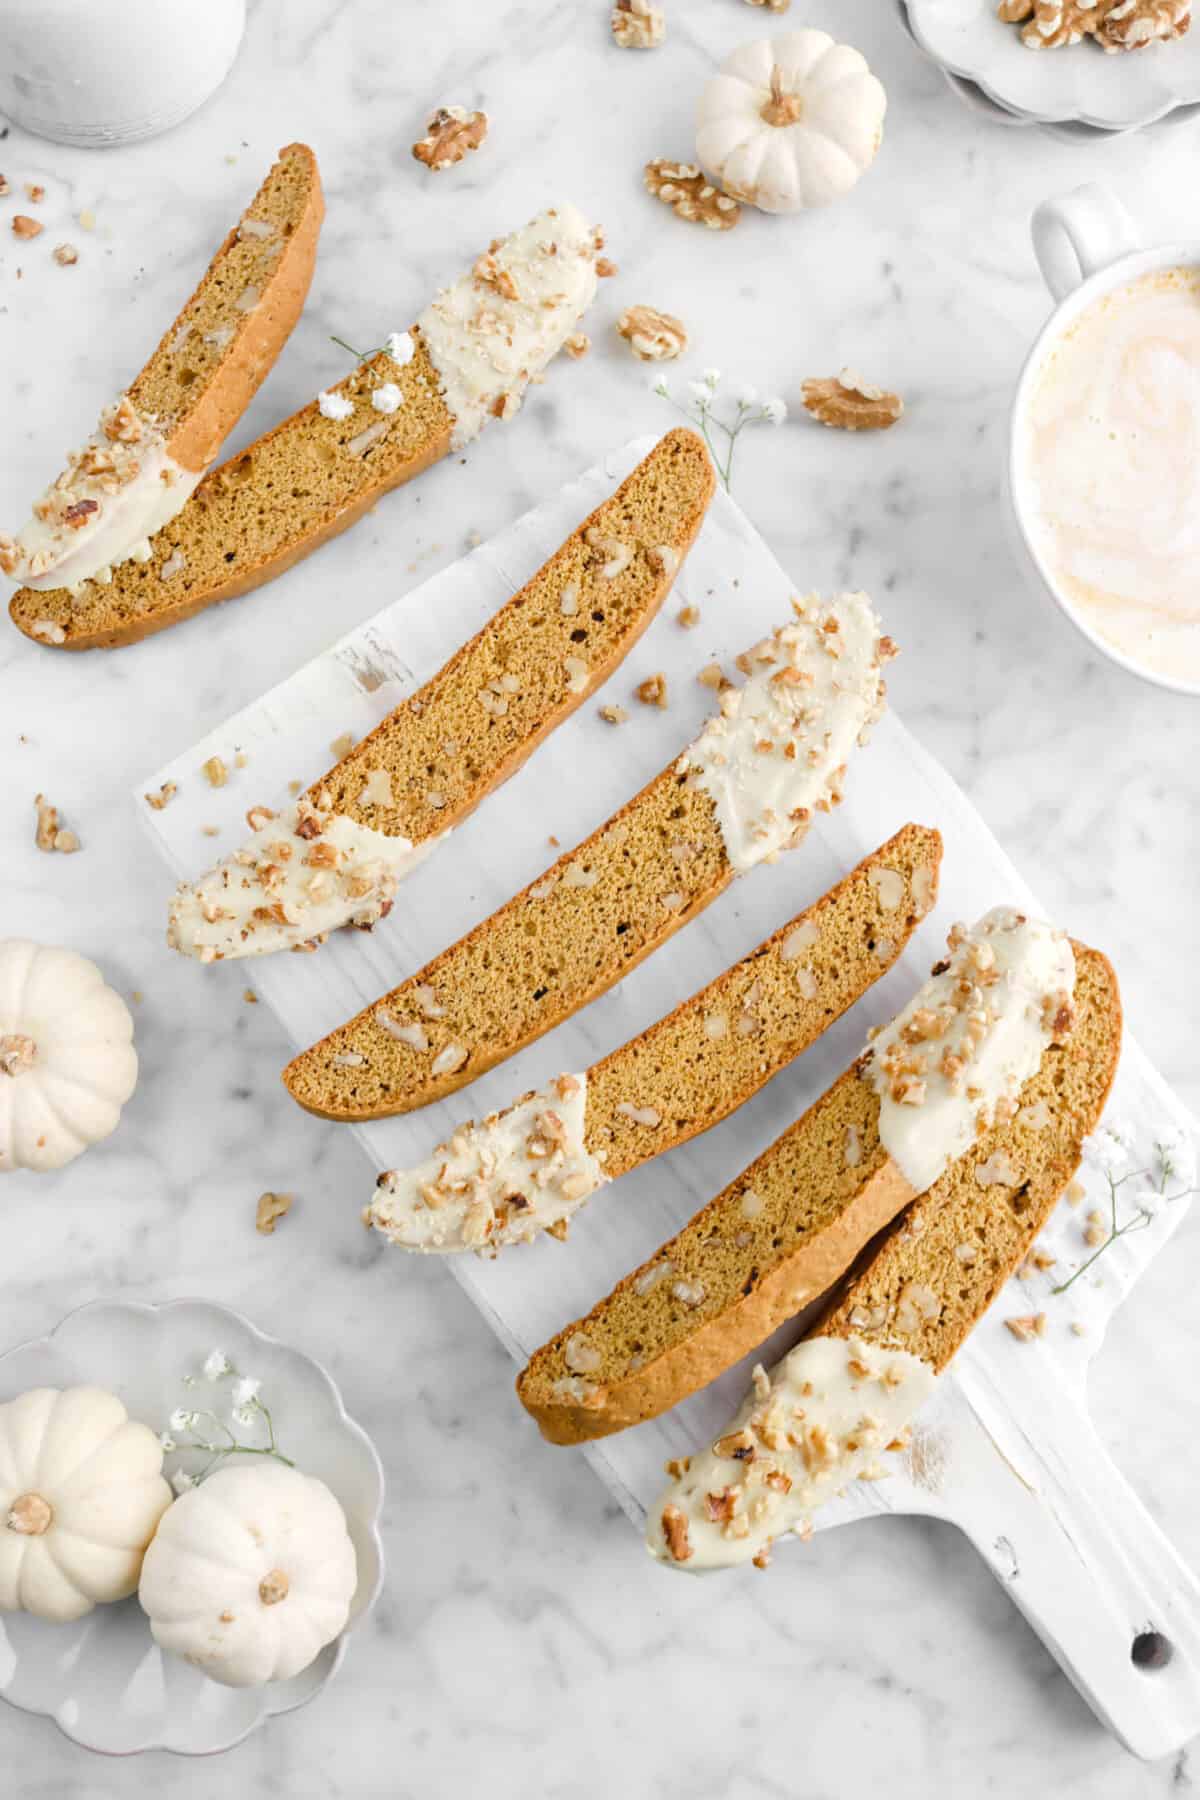 five biscotti on wood serving board with pumpkins, flowers, and walnuts, with two biscotti laying in front of the board